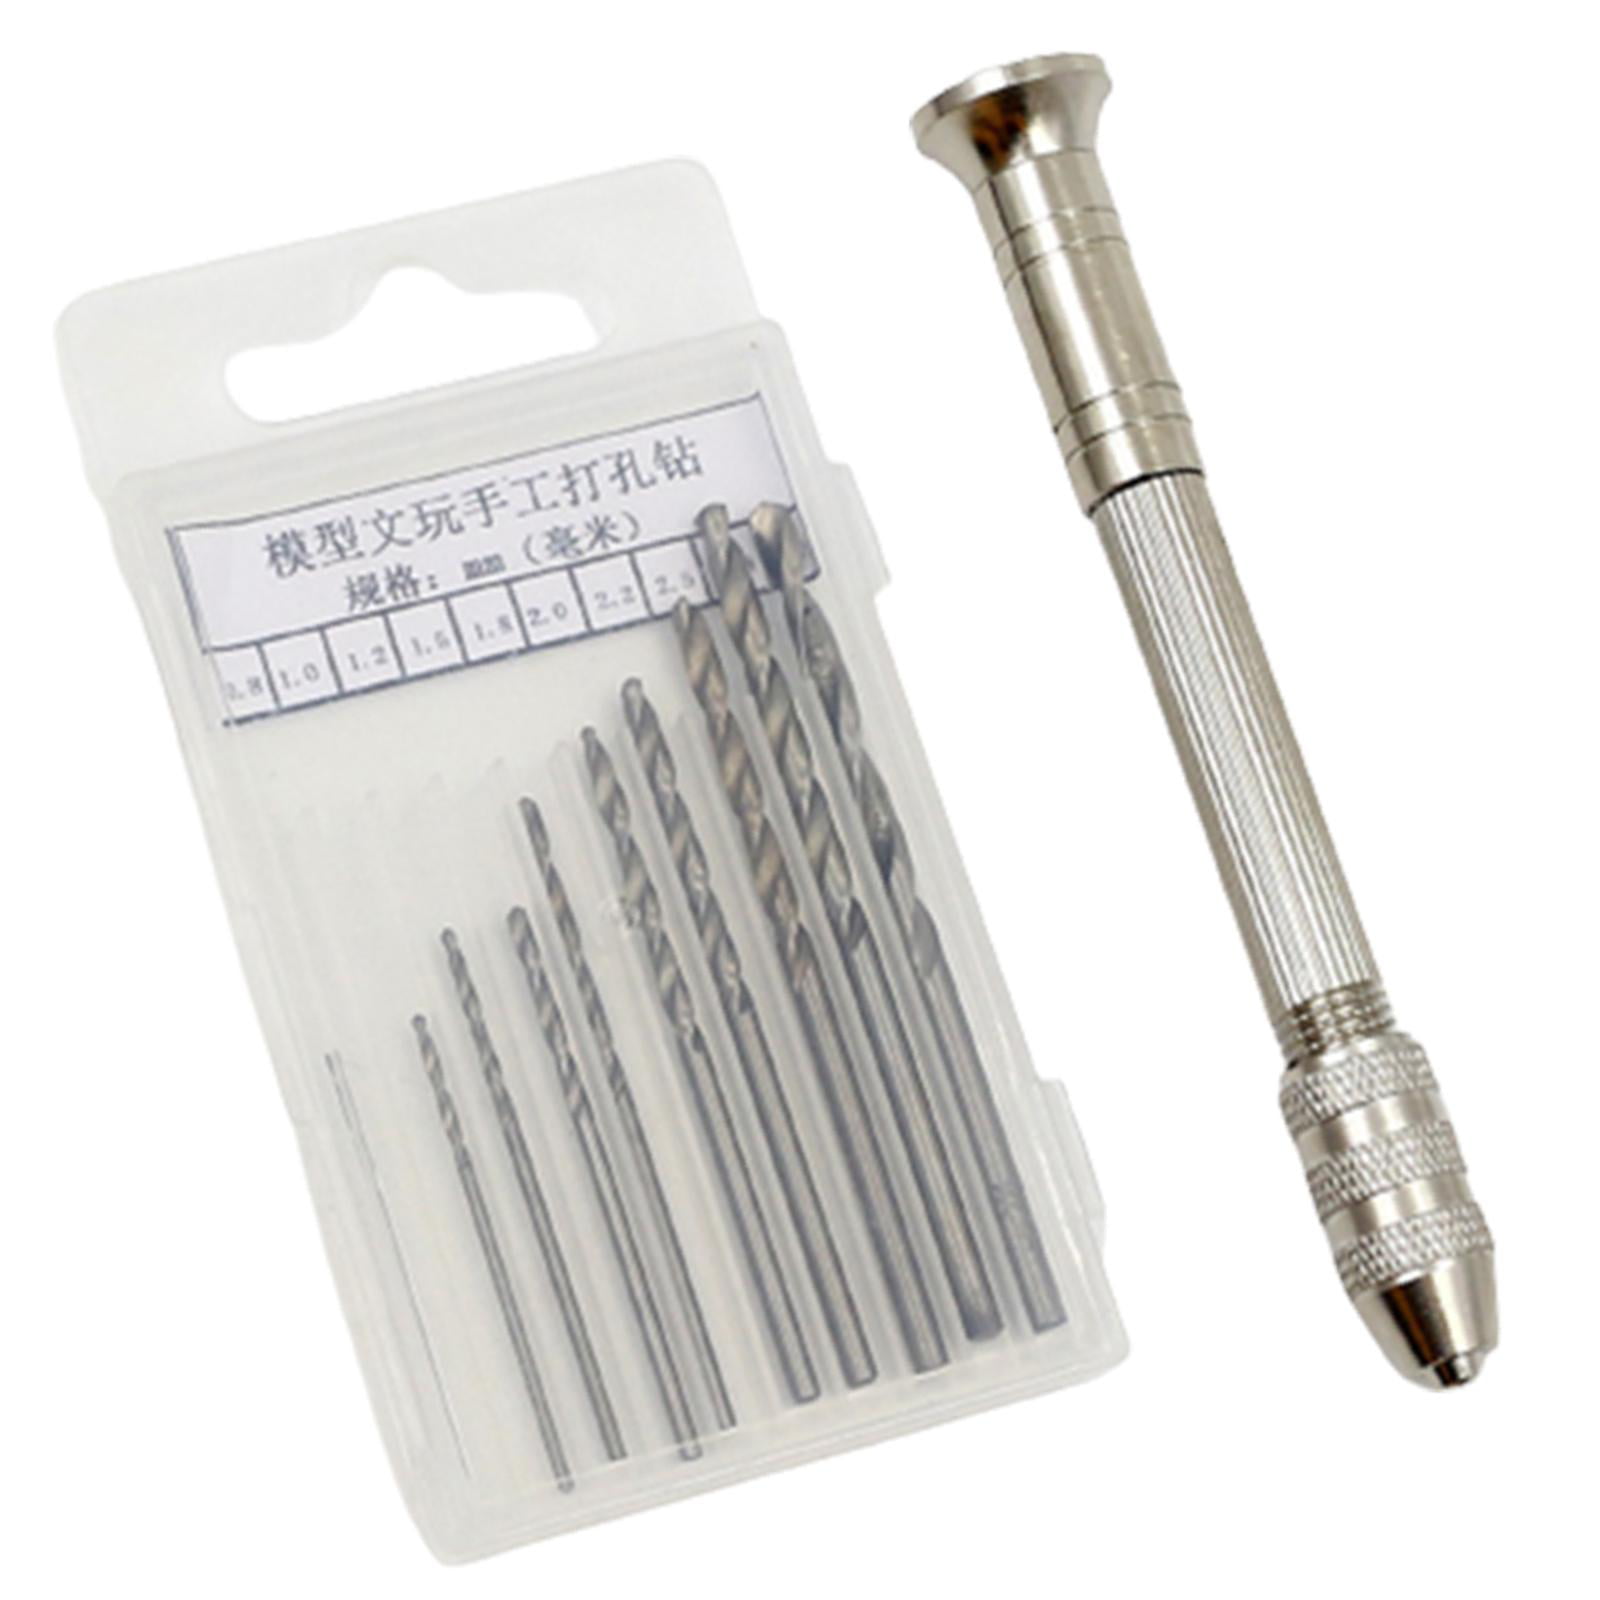 Include Pin Vise Hand Drill Mini Drills and Twist Drills for Craft Carving DIY 36 Pieces Hand Drill Set 